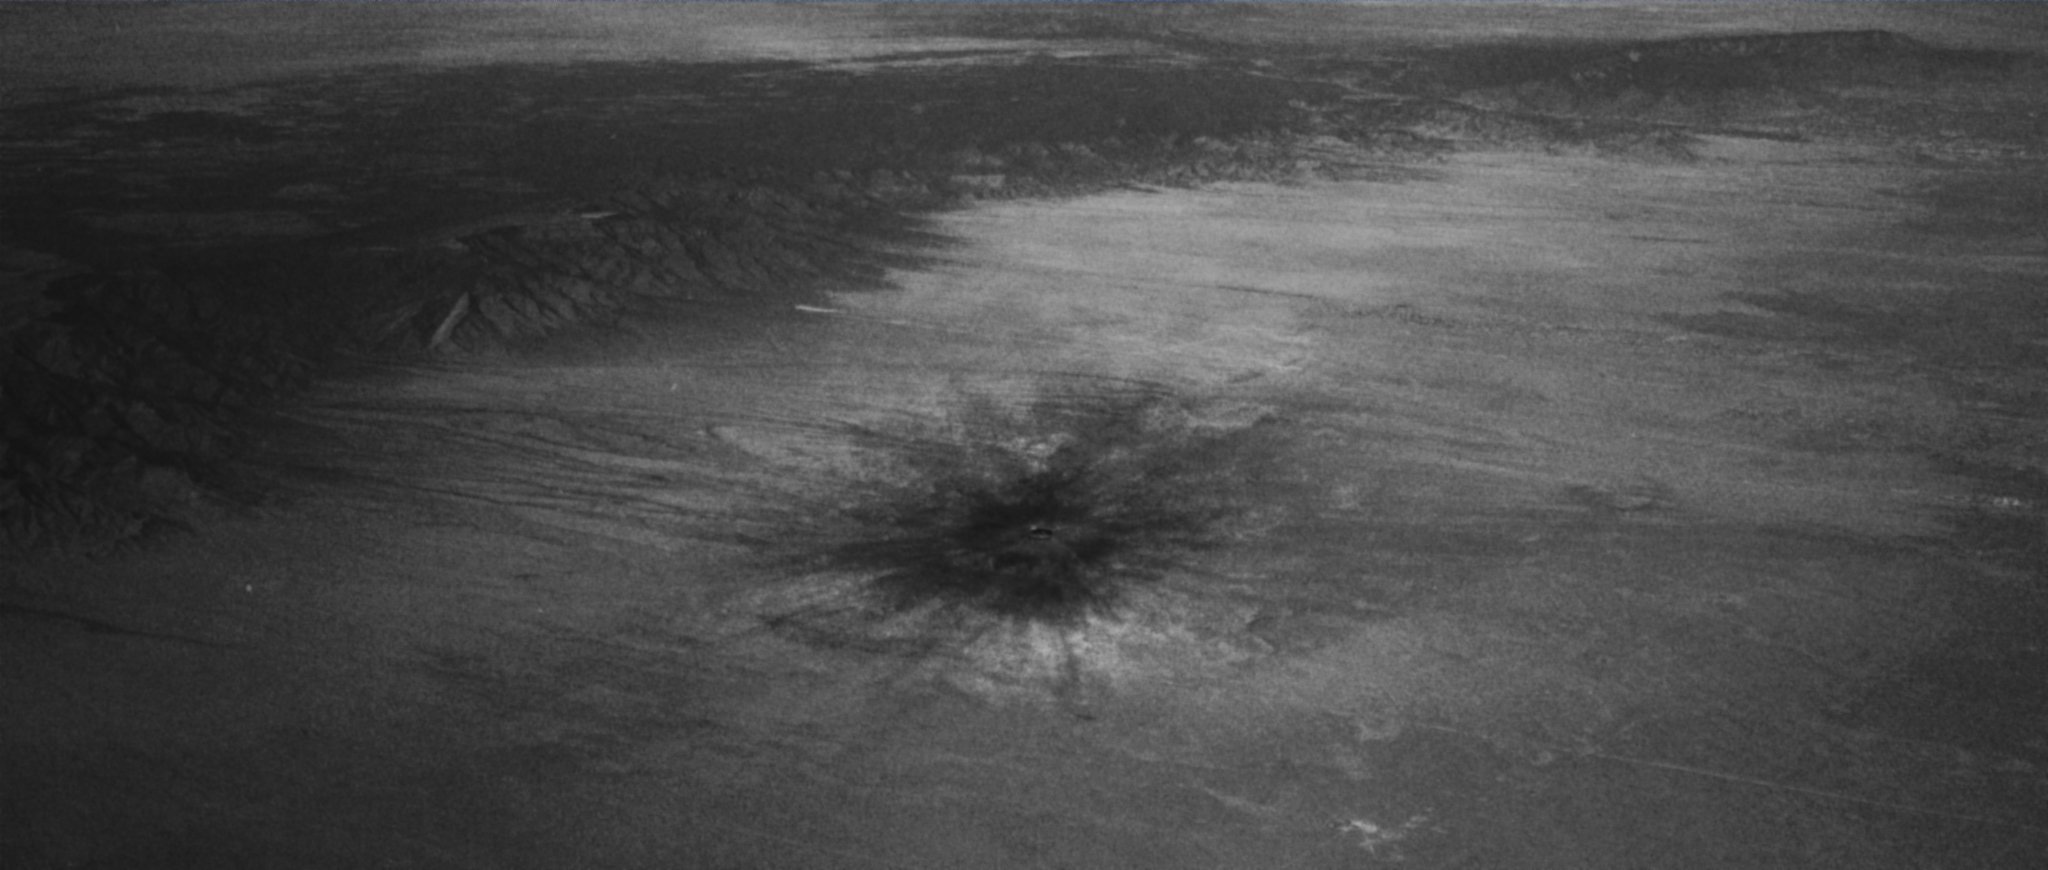 Crater treated (00006).jpg